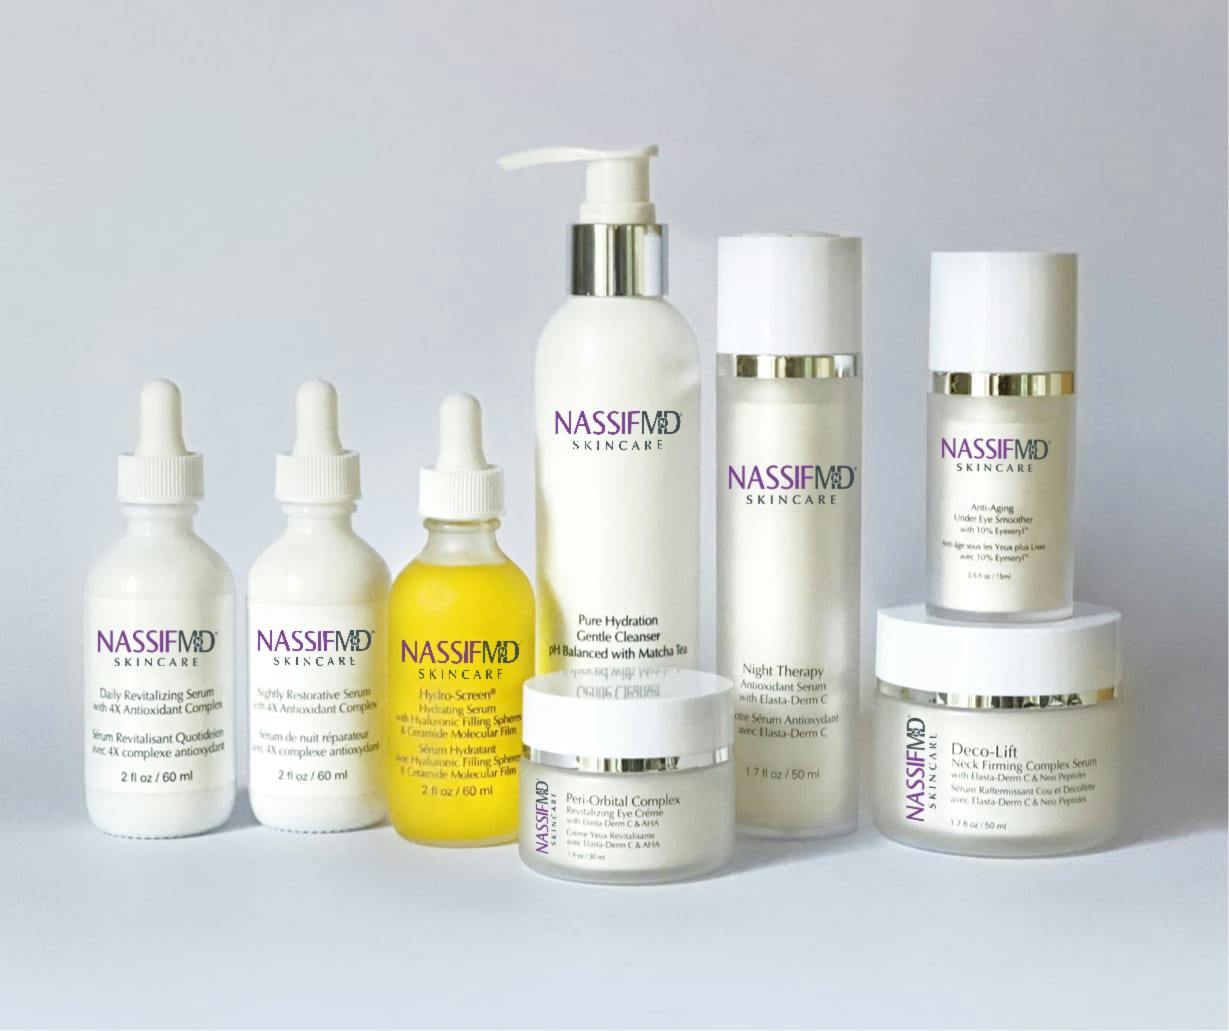 NassifMD skin products